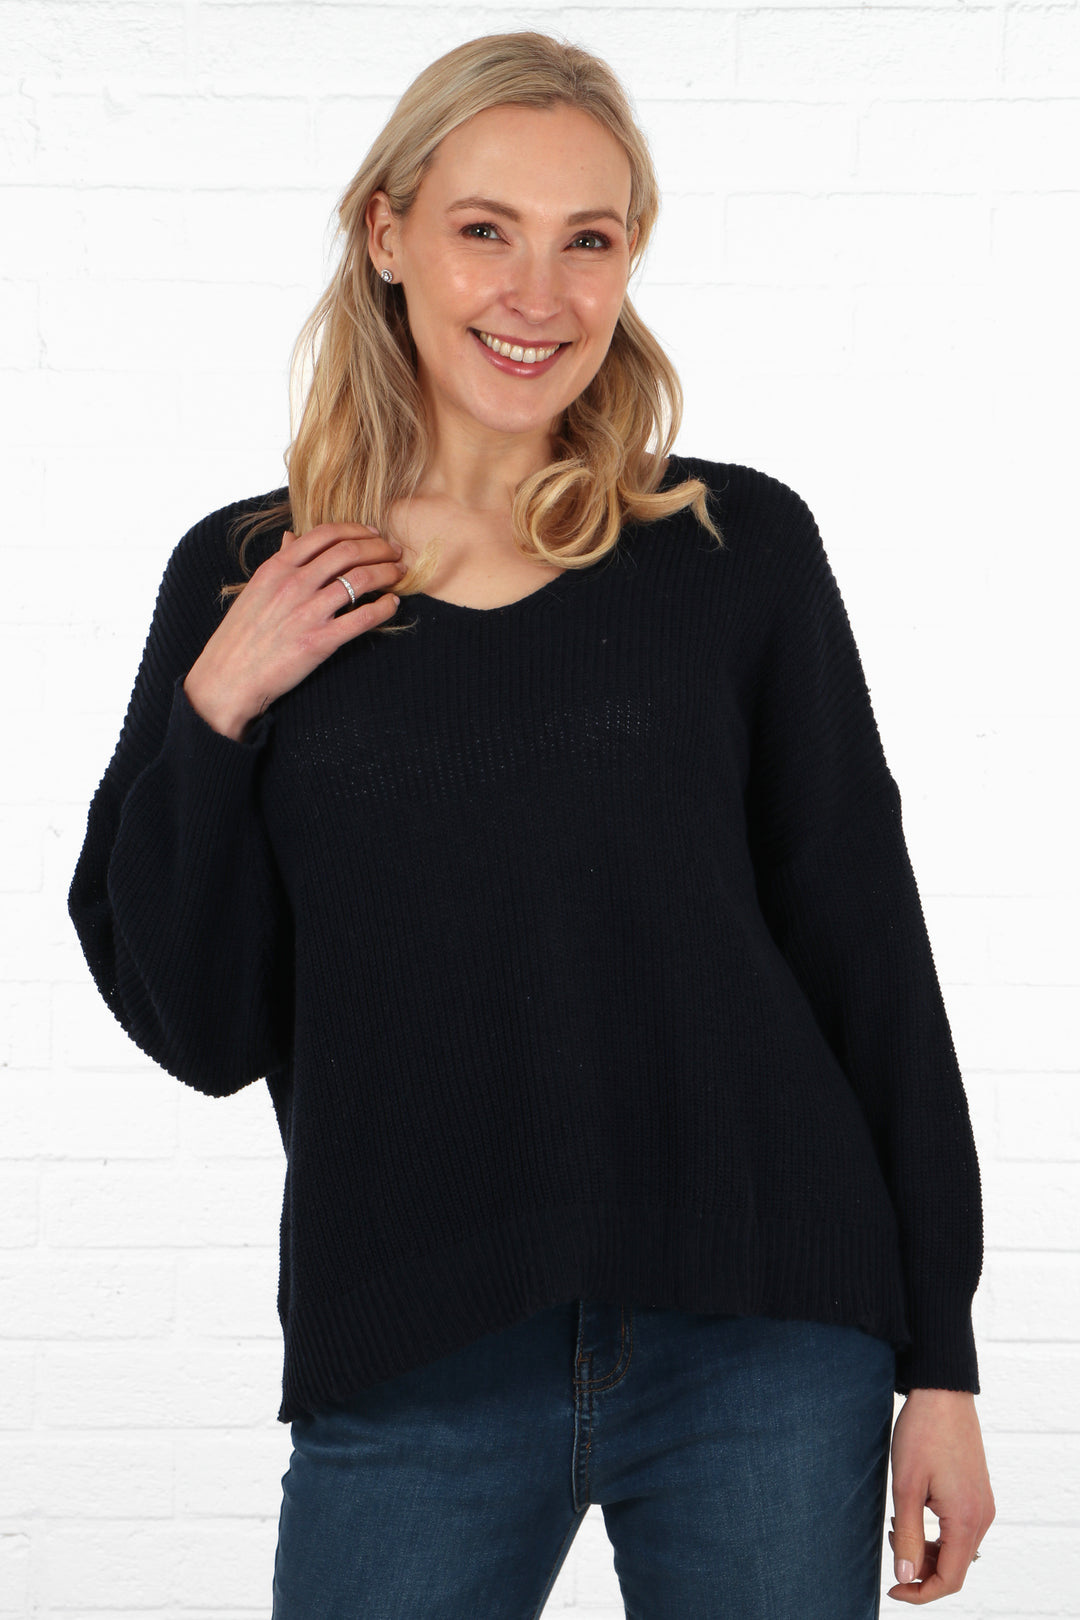 model wearing a fine knitted cotton jumper in navy blue, jumper had long sleeves and a v-neck